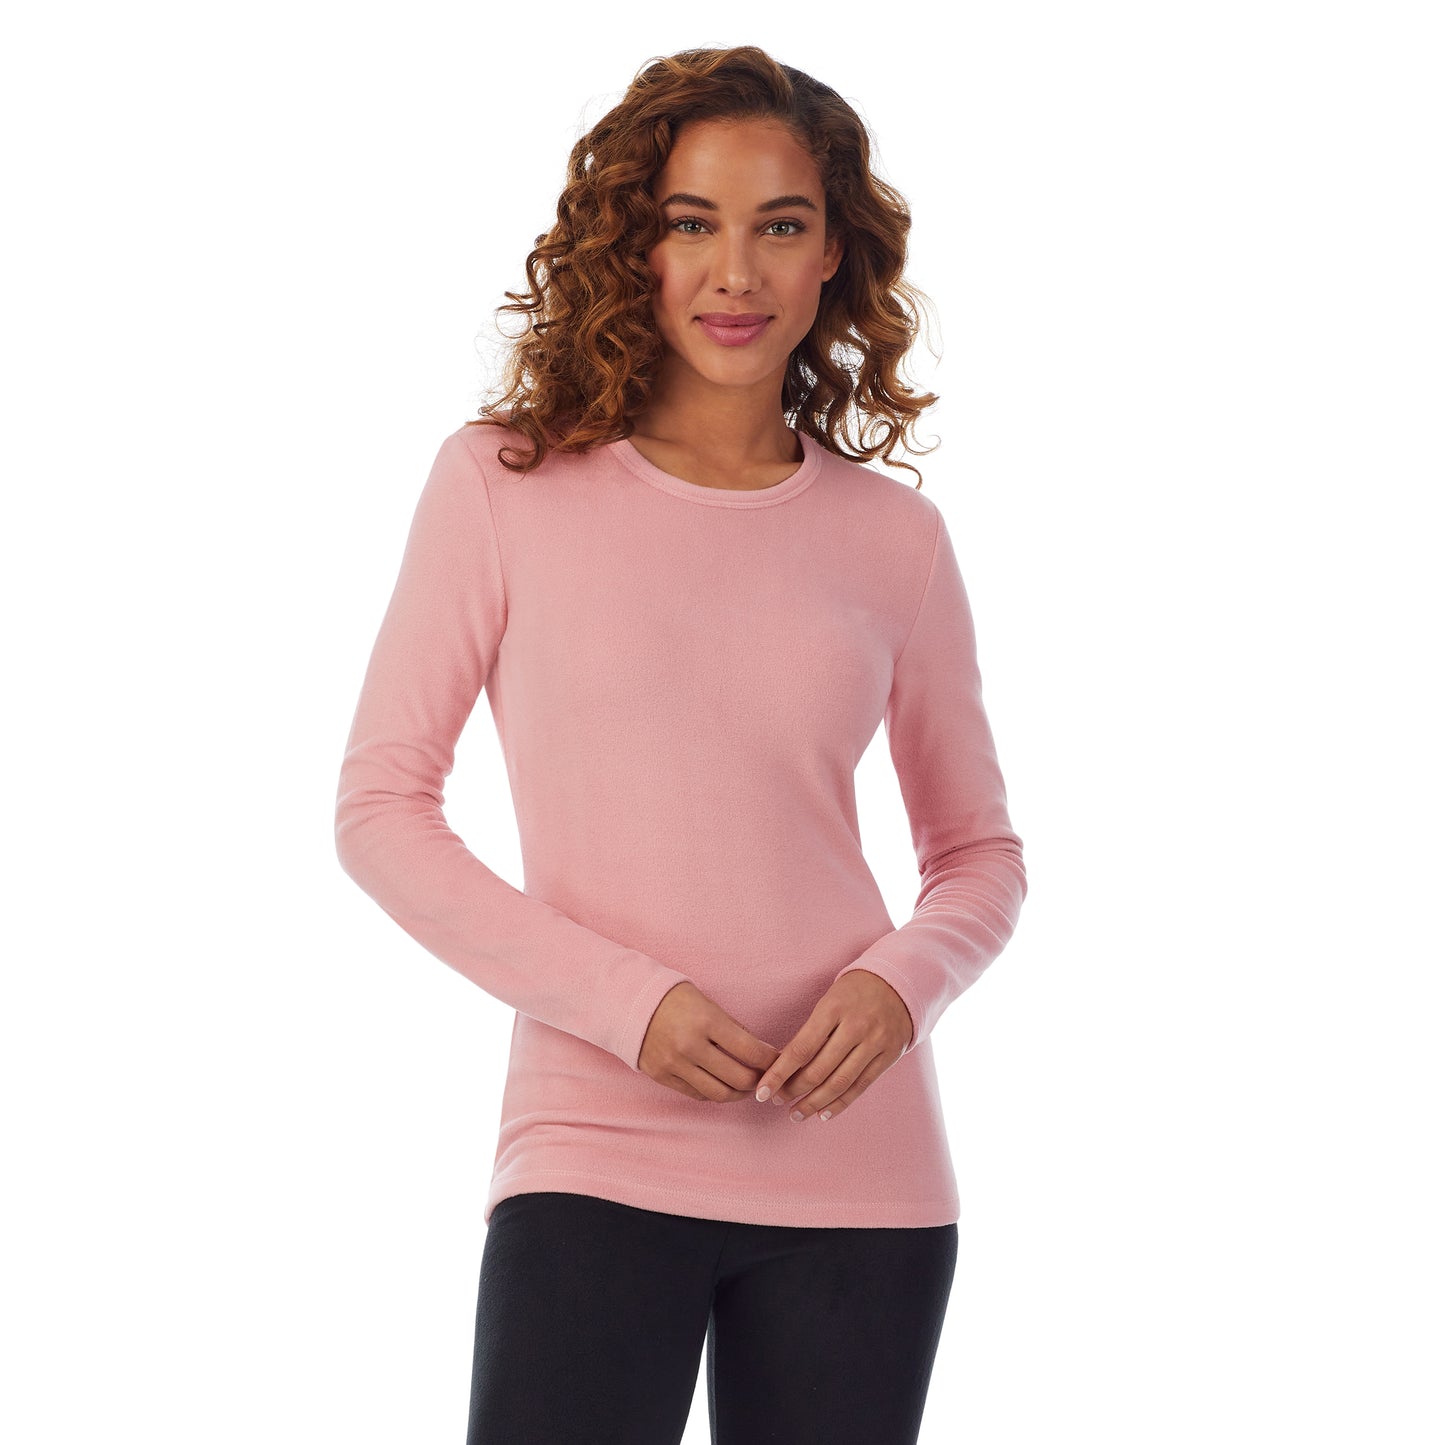 Powder Pink; Model is wearing size S. She is 5’9”, Bust 34”, Waist 23”, Hips 35”.@Upper body of a lady wearing pink long sleeve crew